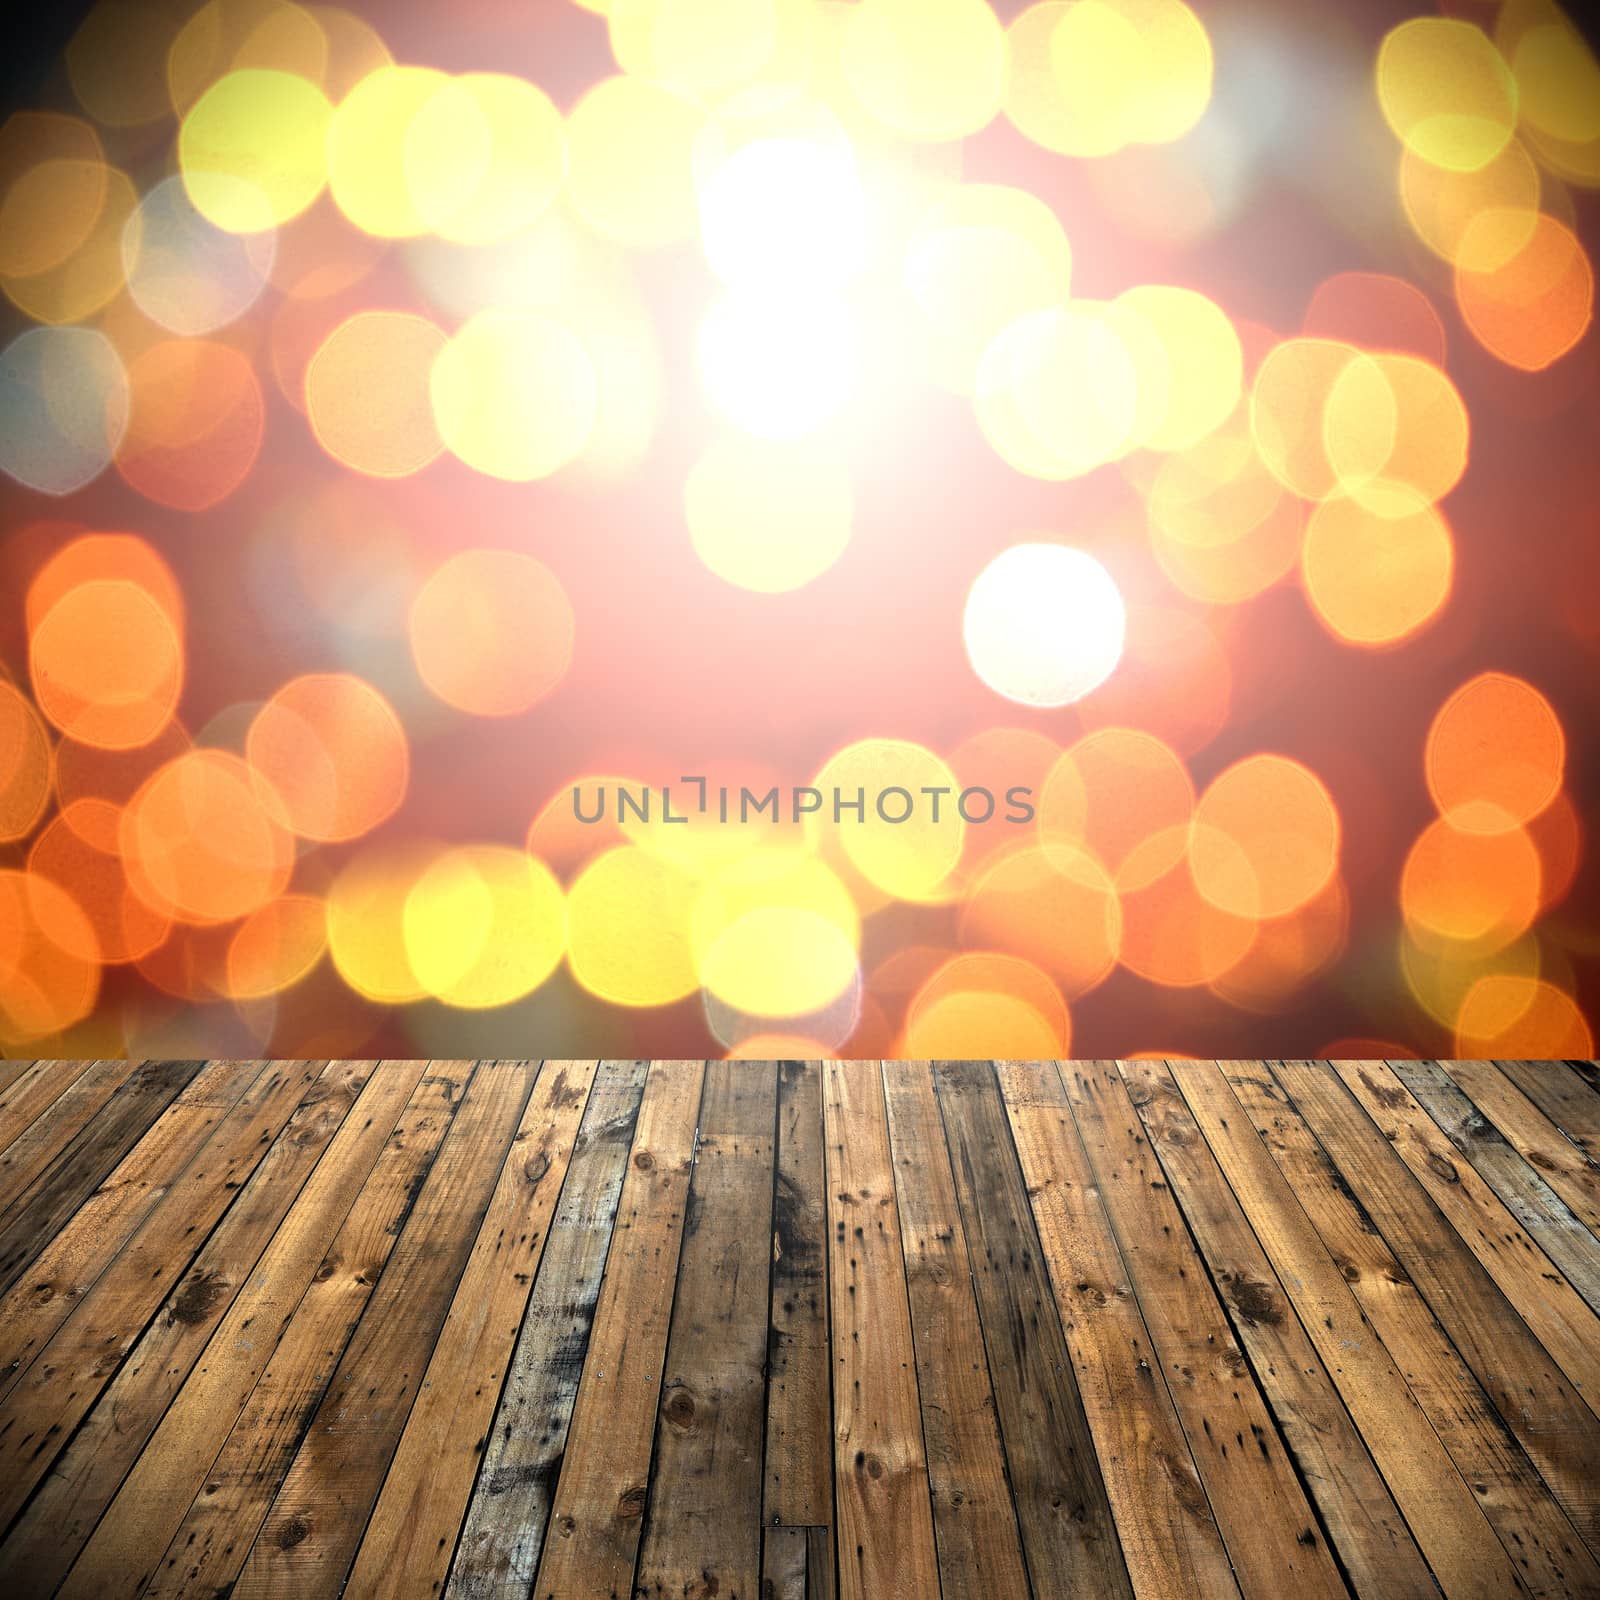 Nice abstract bokeh background by pixbox77